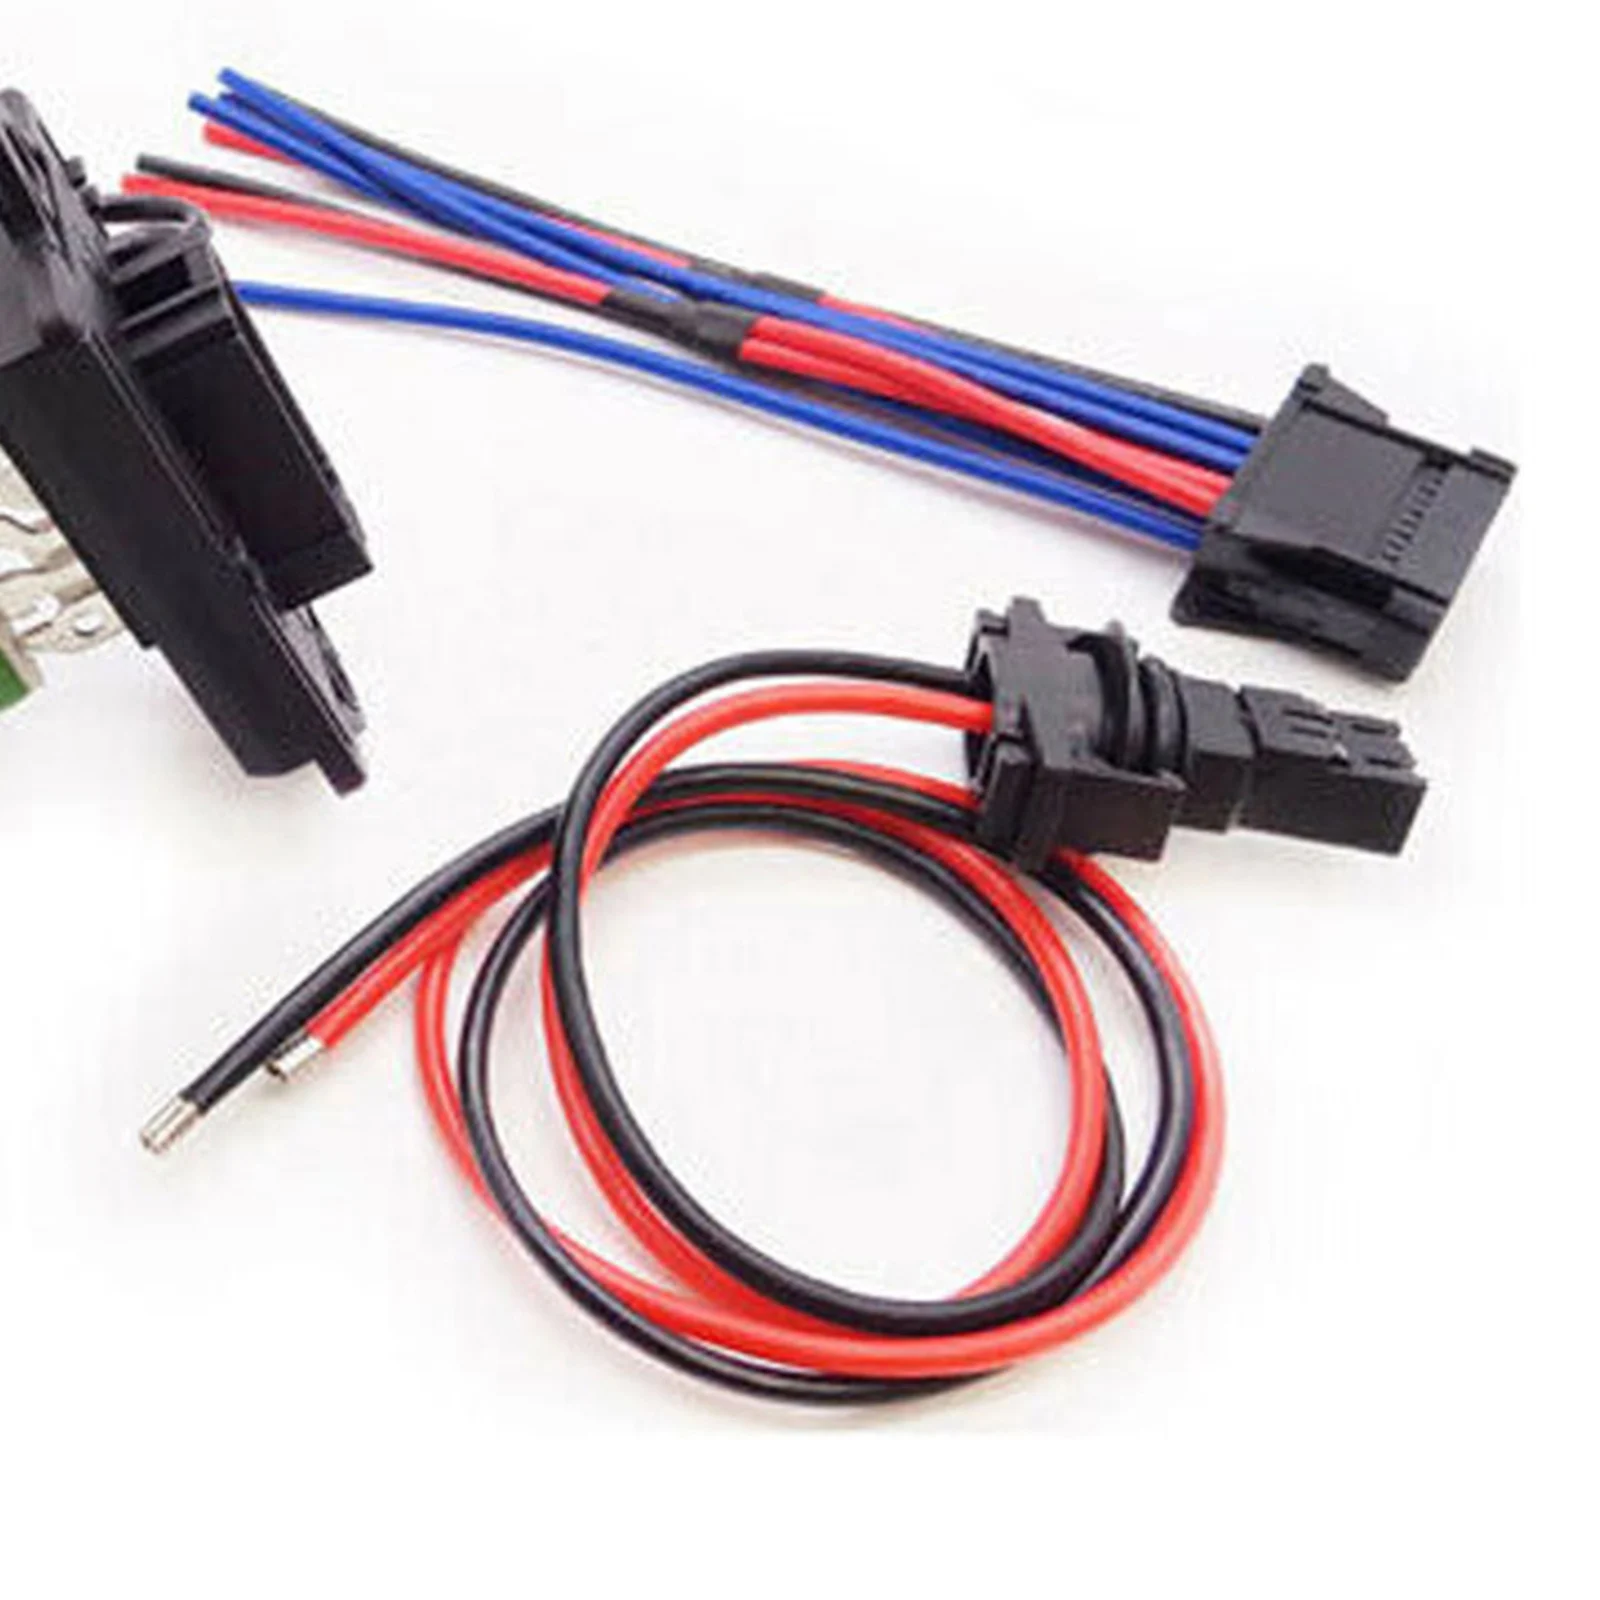 Heater Blower Control Resistor and Wiring Loom for Clio MK3 7701209803 ,Easy to Install